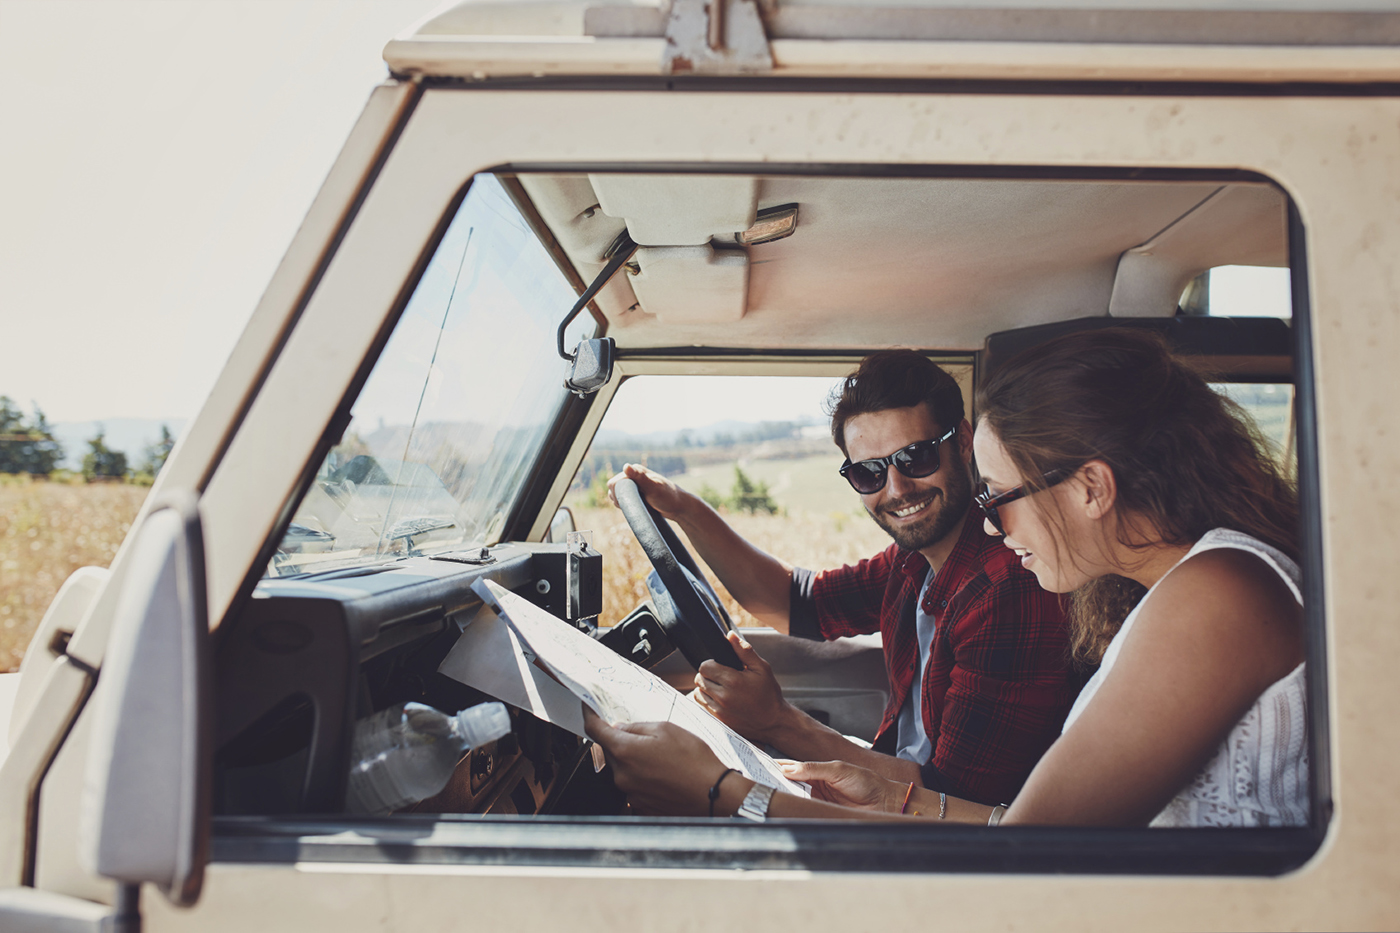 Man and woman on a road trip and reading a map together while seated inside their car. Happy young couple going on road trip.